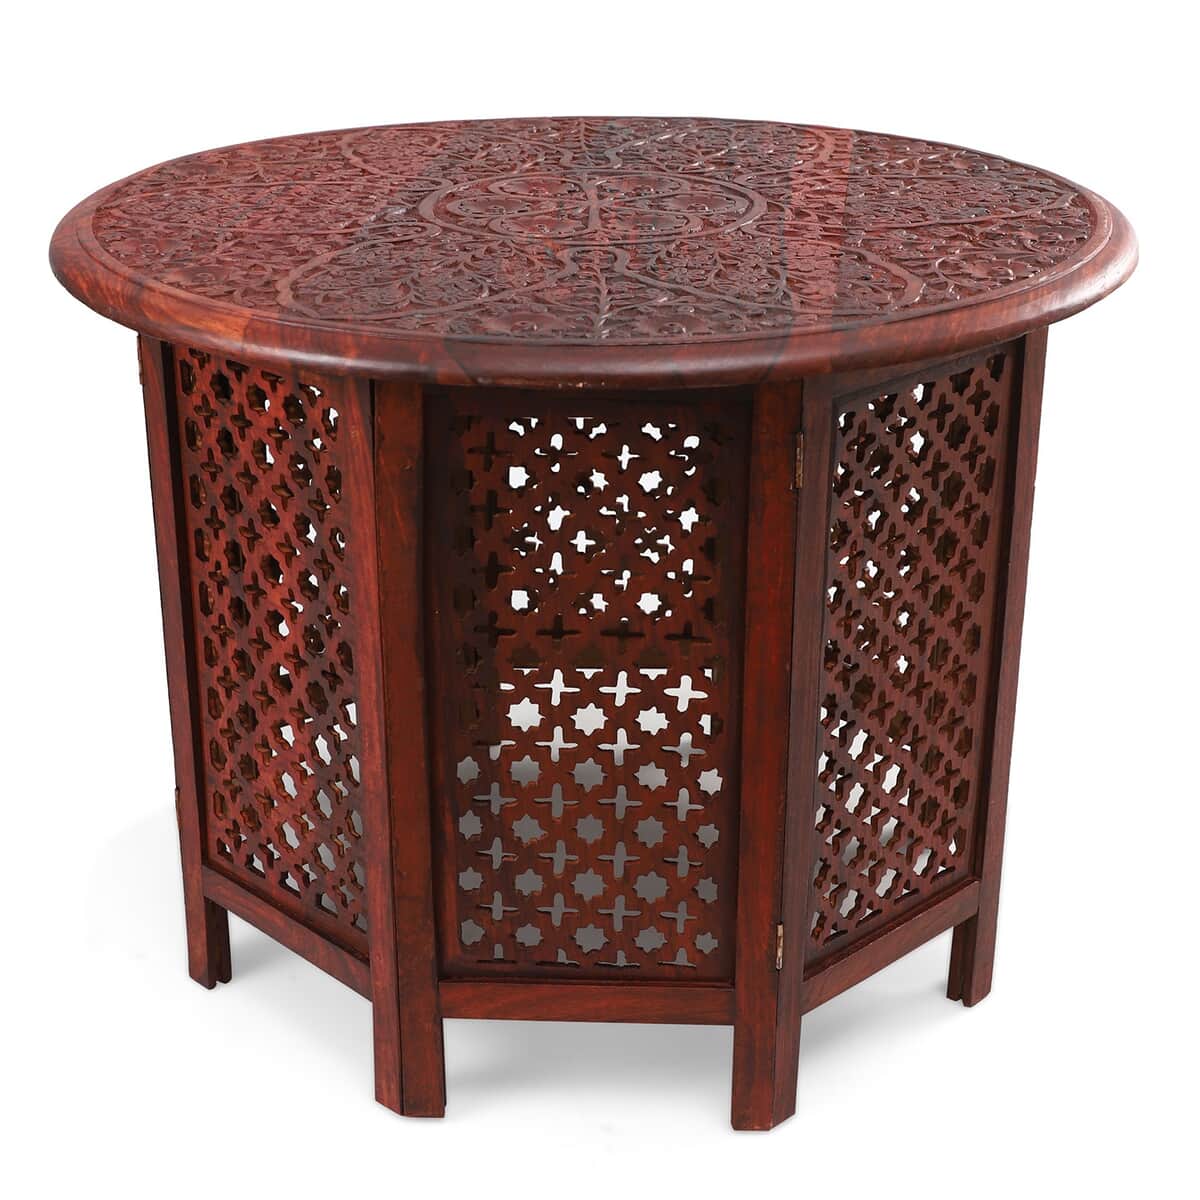 NAKKASHI Handcarved Wooden Table with Round Top Floral & Jali Stand image number 0